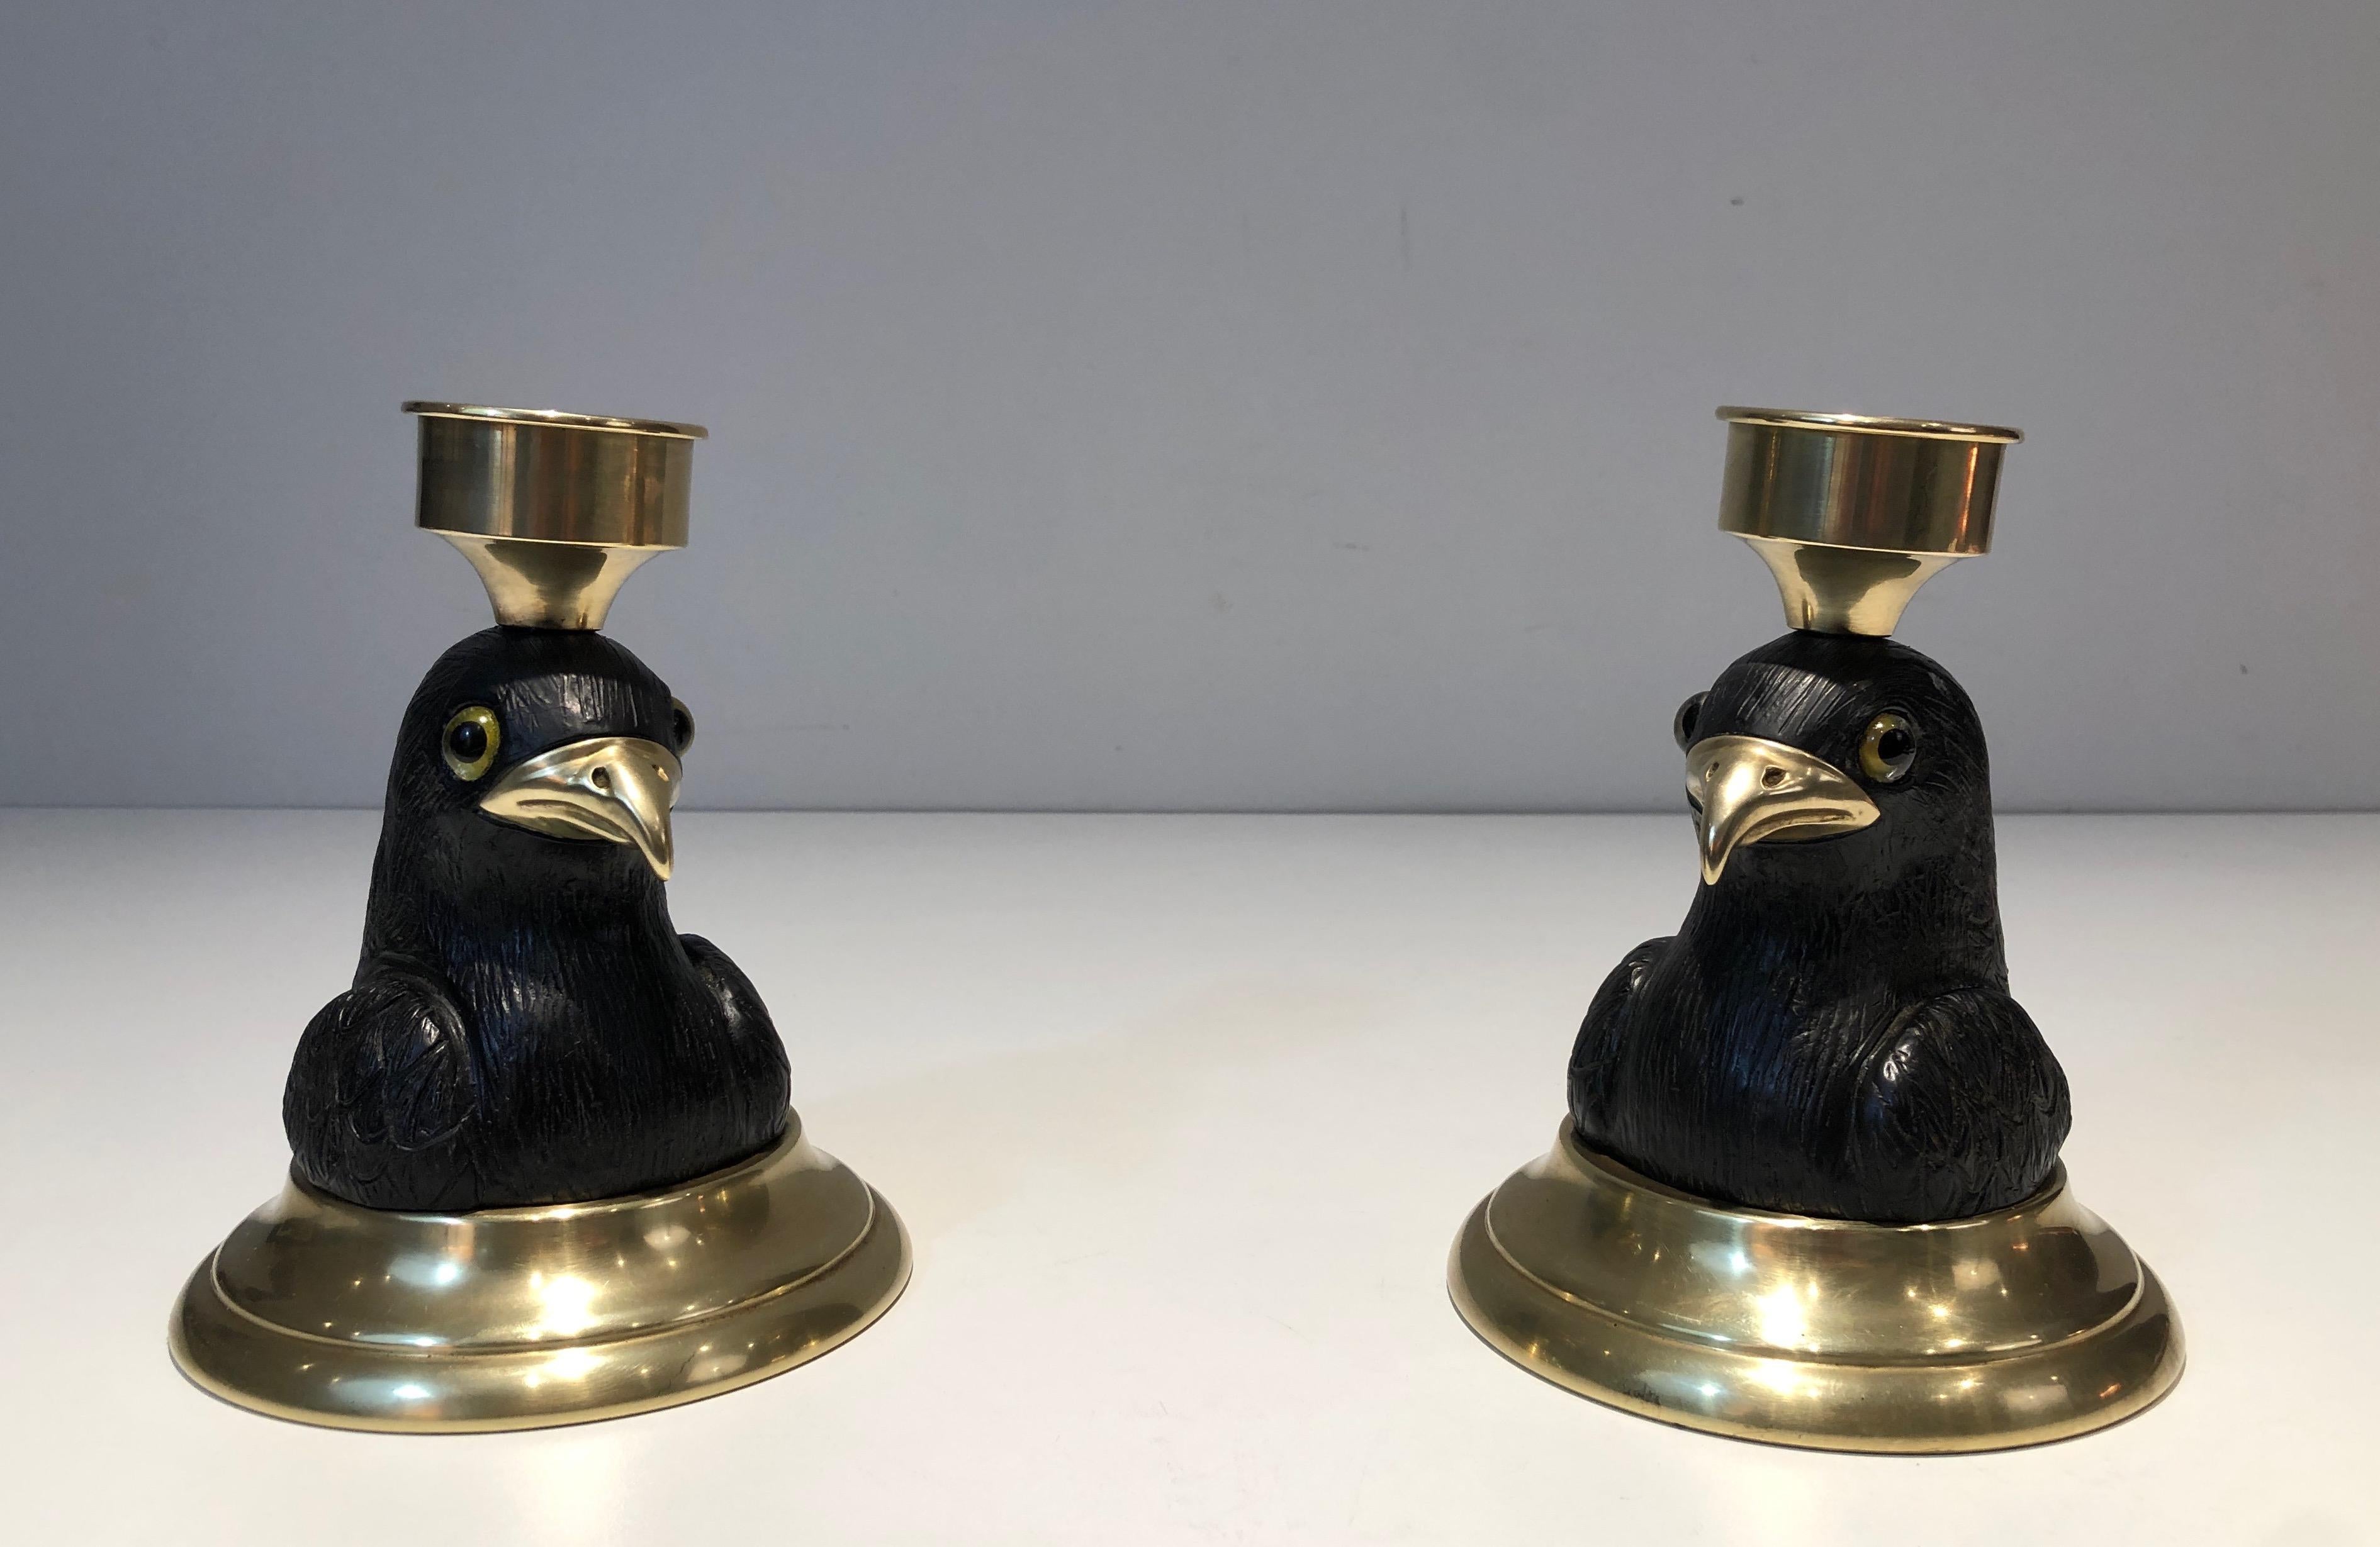 This very nice and rare candlesticks or table lamps are made of carved wood eagles with brass beaks and glass eyes on a brass base. This is a nice French work stamped Houy Pouiga. Circa 1970